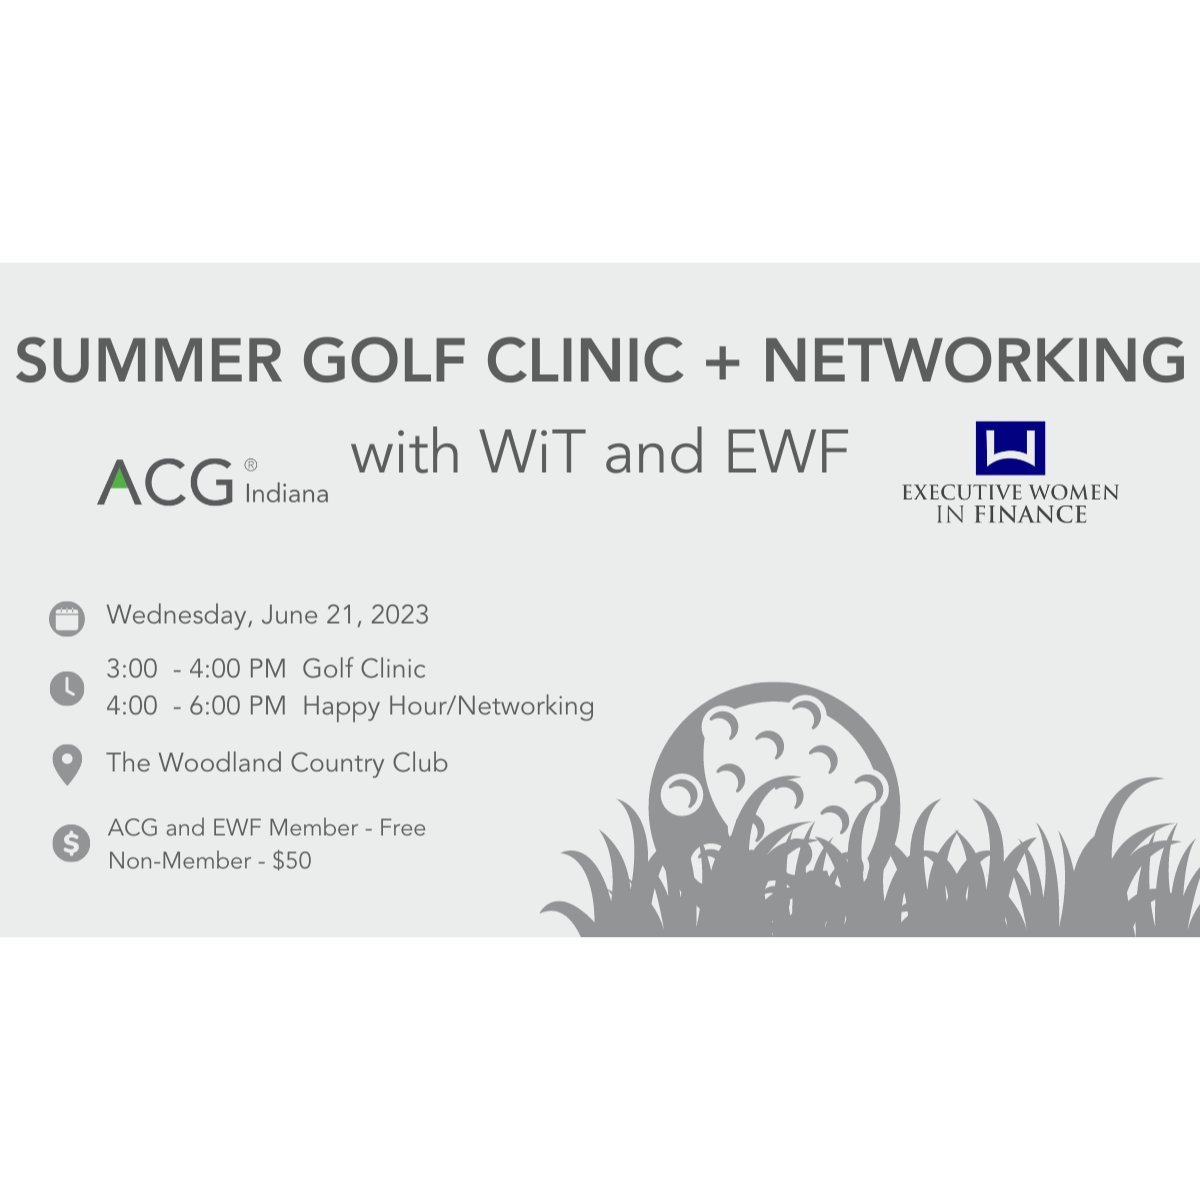 We are looking forward to seeing everyone on June 21 at The Woodland Country Club for our Summer Golf Clinic & Network Event  with WiT and EWF. If you love golf and networking, then this event is for you! #networking #ladieswhogolf #fore #ACGIndiana #EWFIndiana